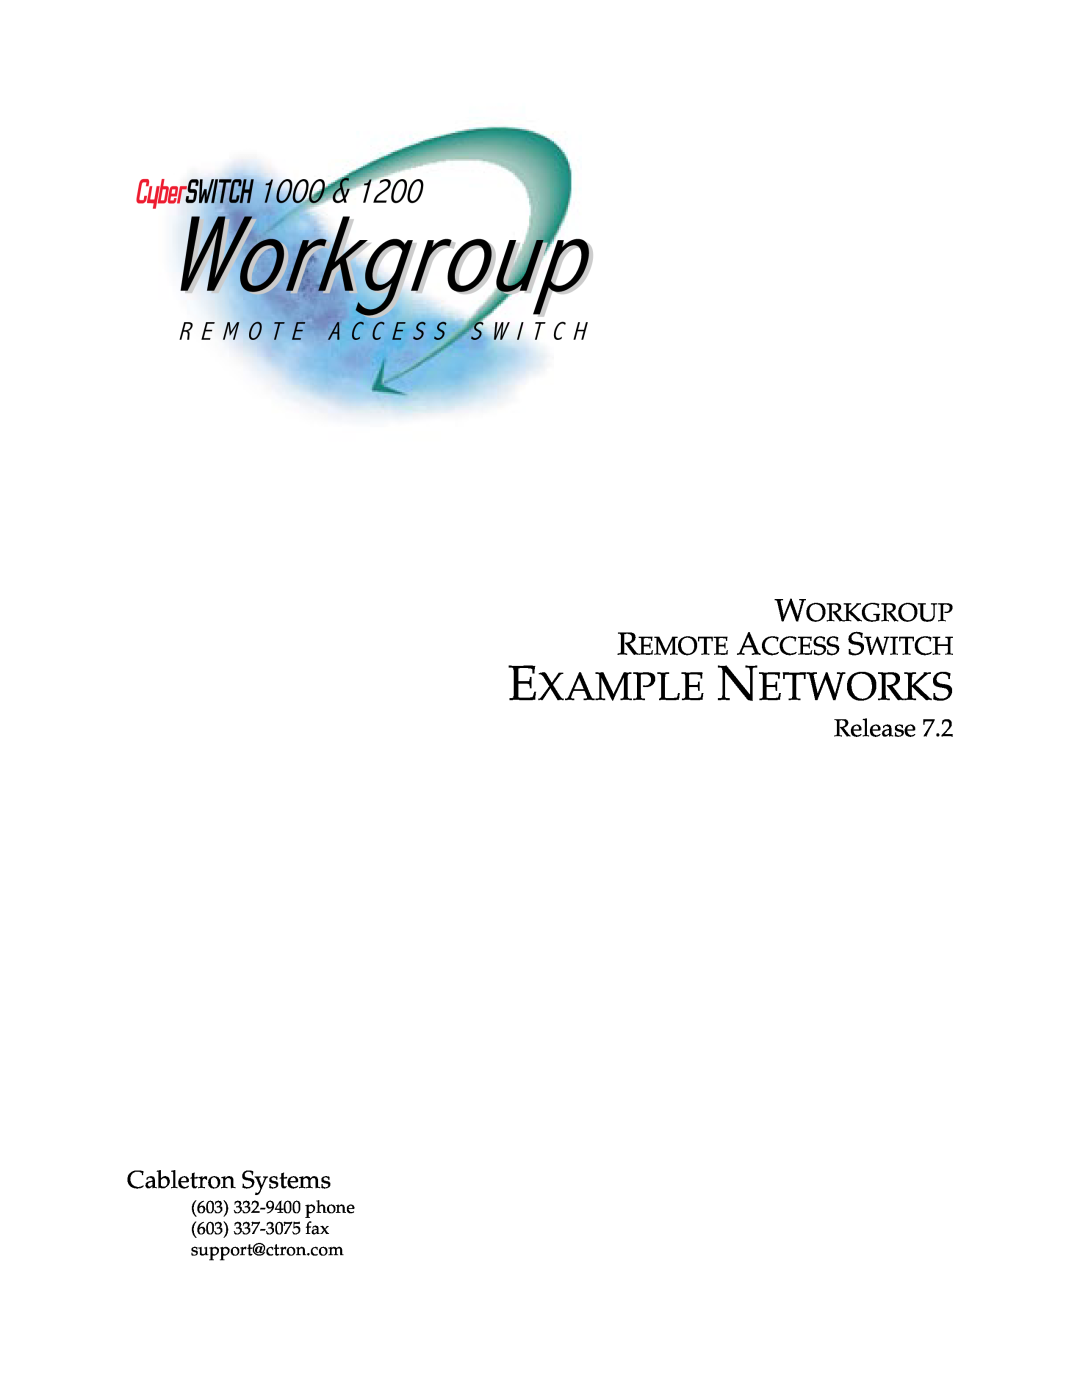 Cabletron Systems 1200, 1000 manual Example Networks, Workgroup Remote Access Switch, Release Cabletron Systems 